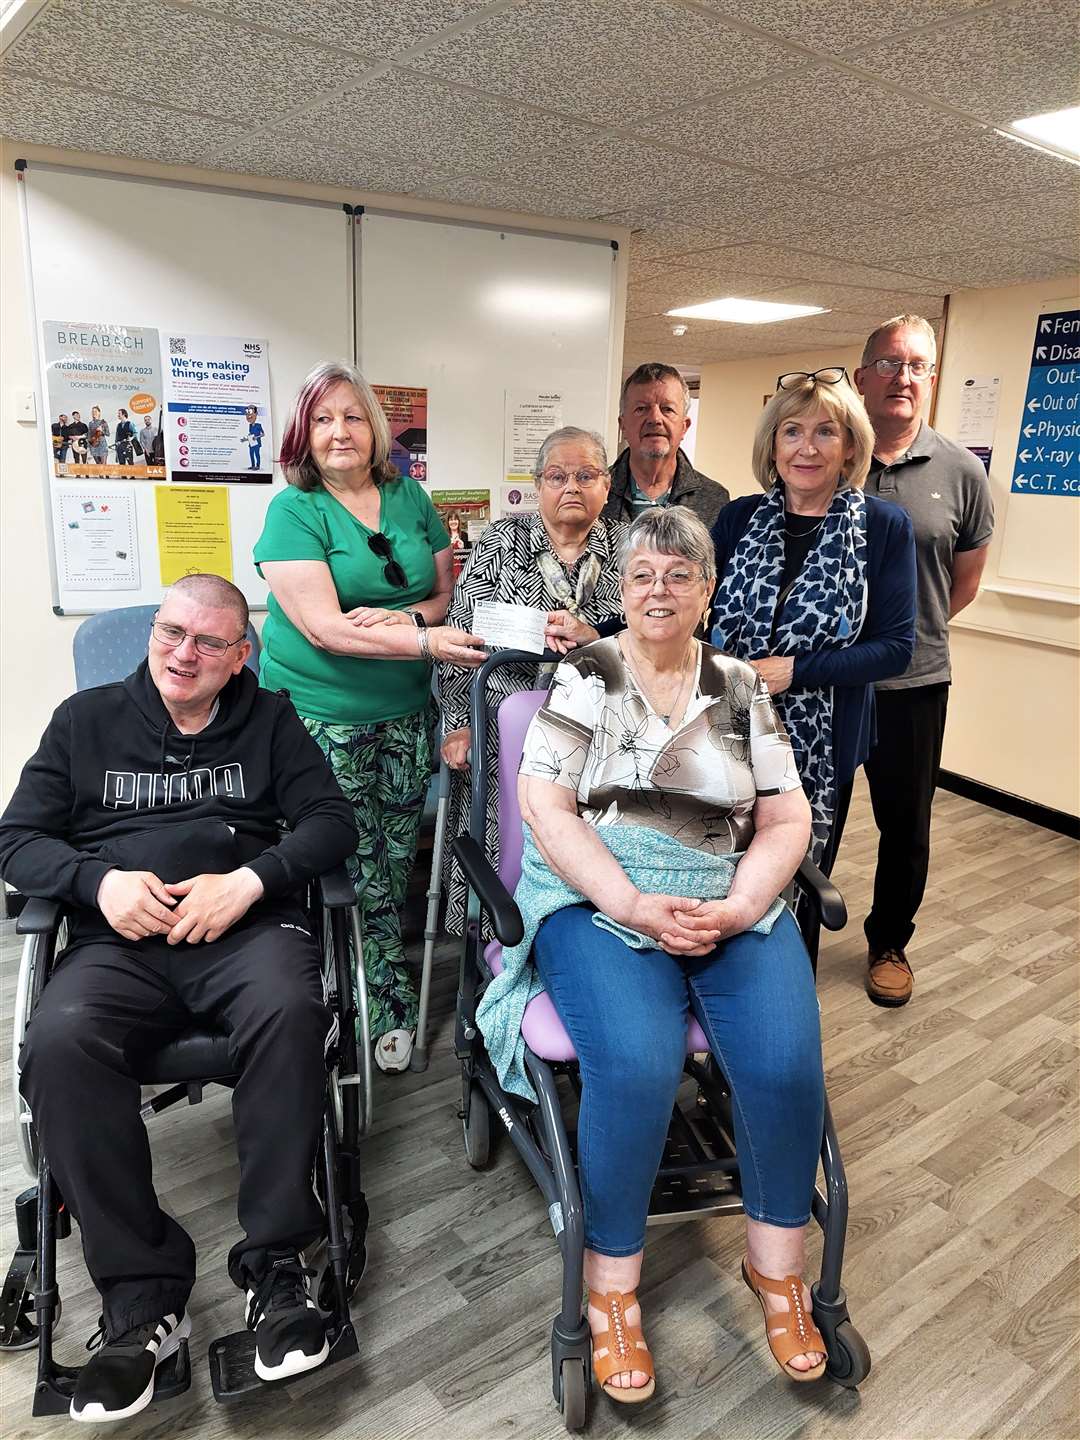 The wheelchairs are delivered to Caithness General Hospital in Wick thanks to the Caithness Disabled Access Panel (CDAP). From left at rear, CDAP panel member and local councillor Jan McEwan, Helen Budge CDAP chair, John Niwa CDAP member, Pam Garbe head of hospital, Alan Tait CVG support for CDAP. Front from left, CDAP members Chris and Syd Morrice.